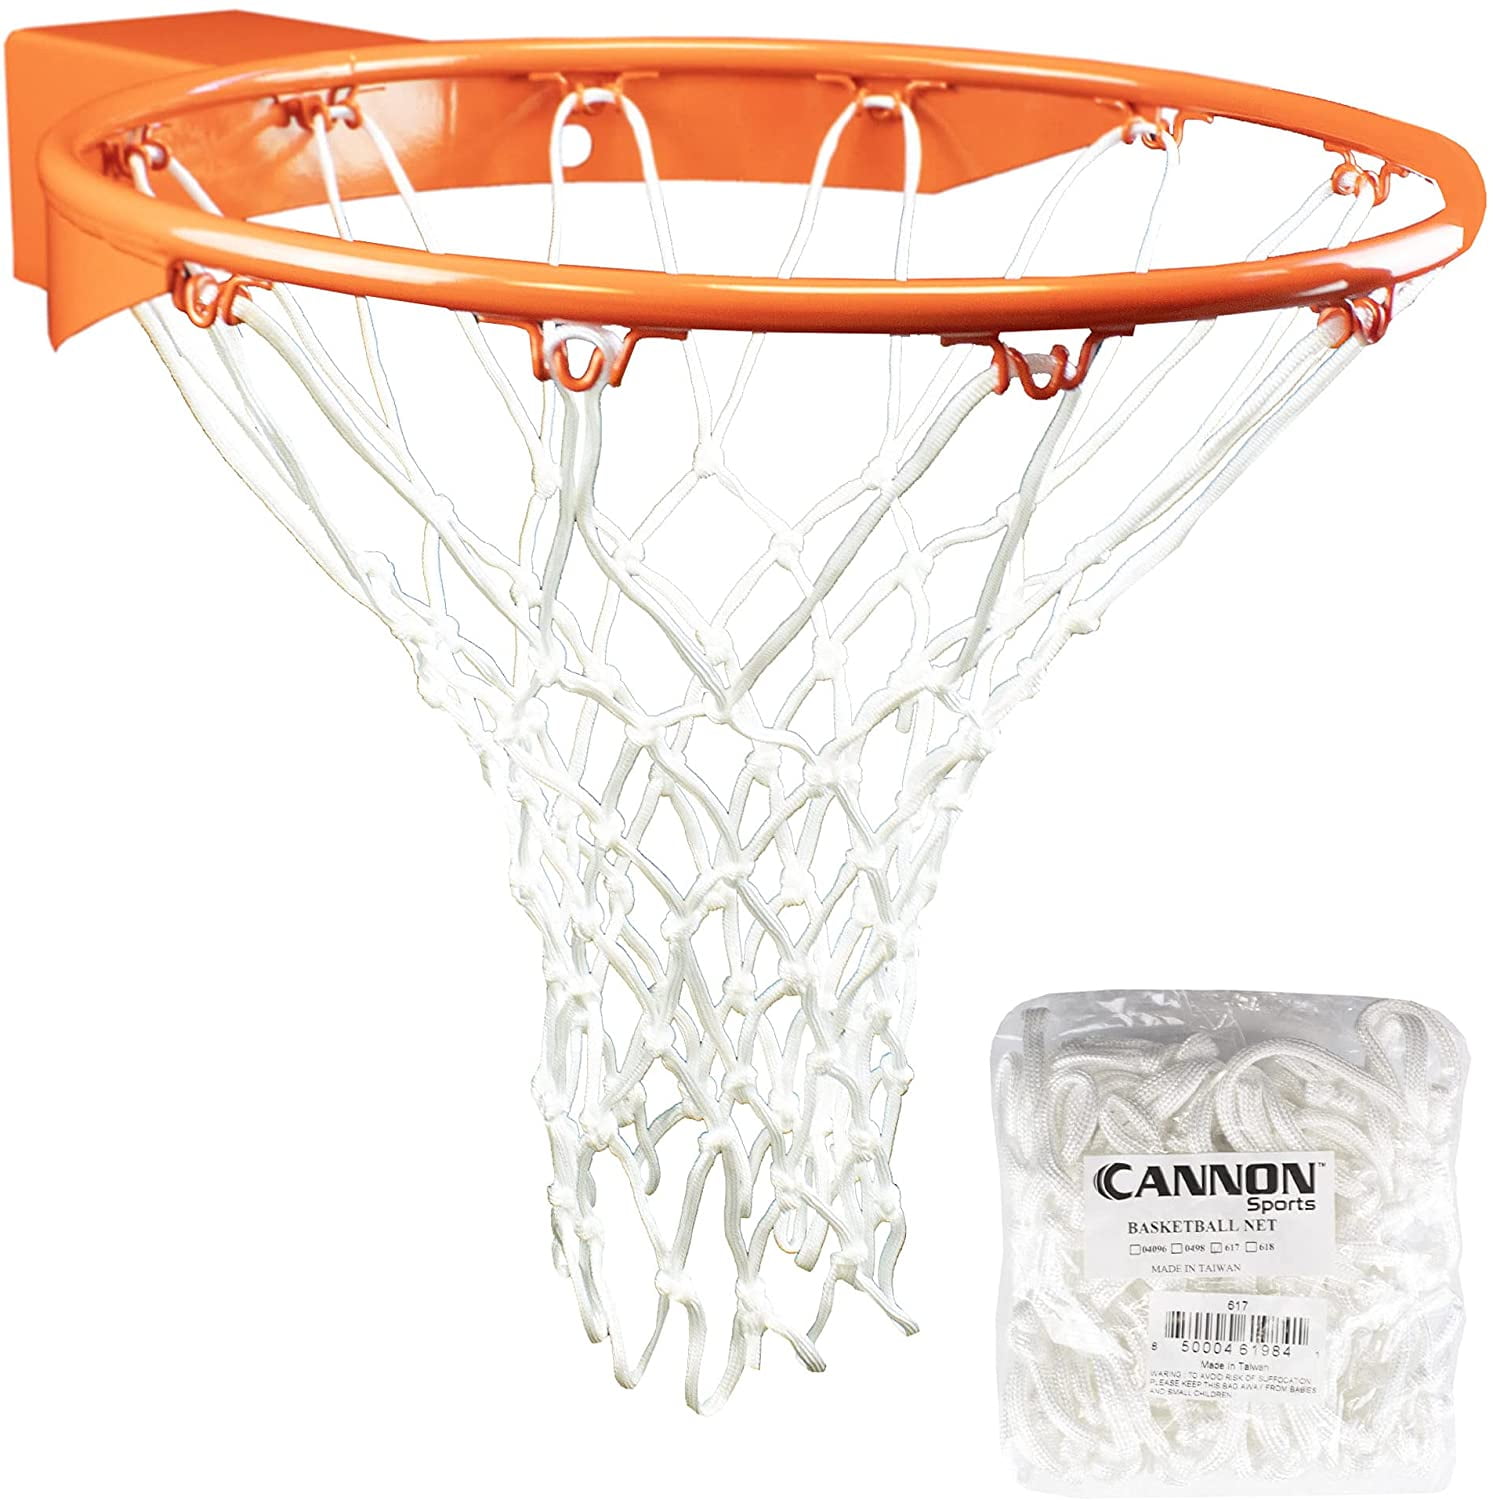 Basketball Chain Net Rare high quality brass plated and polished.... Gold 